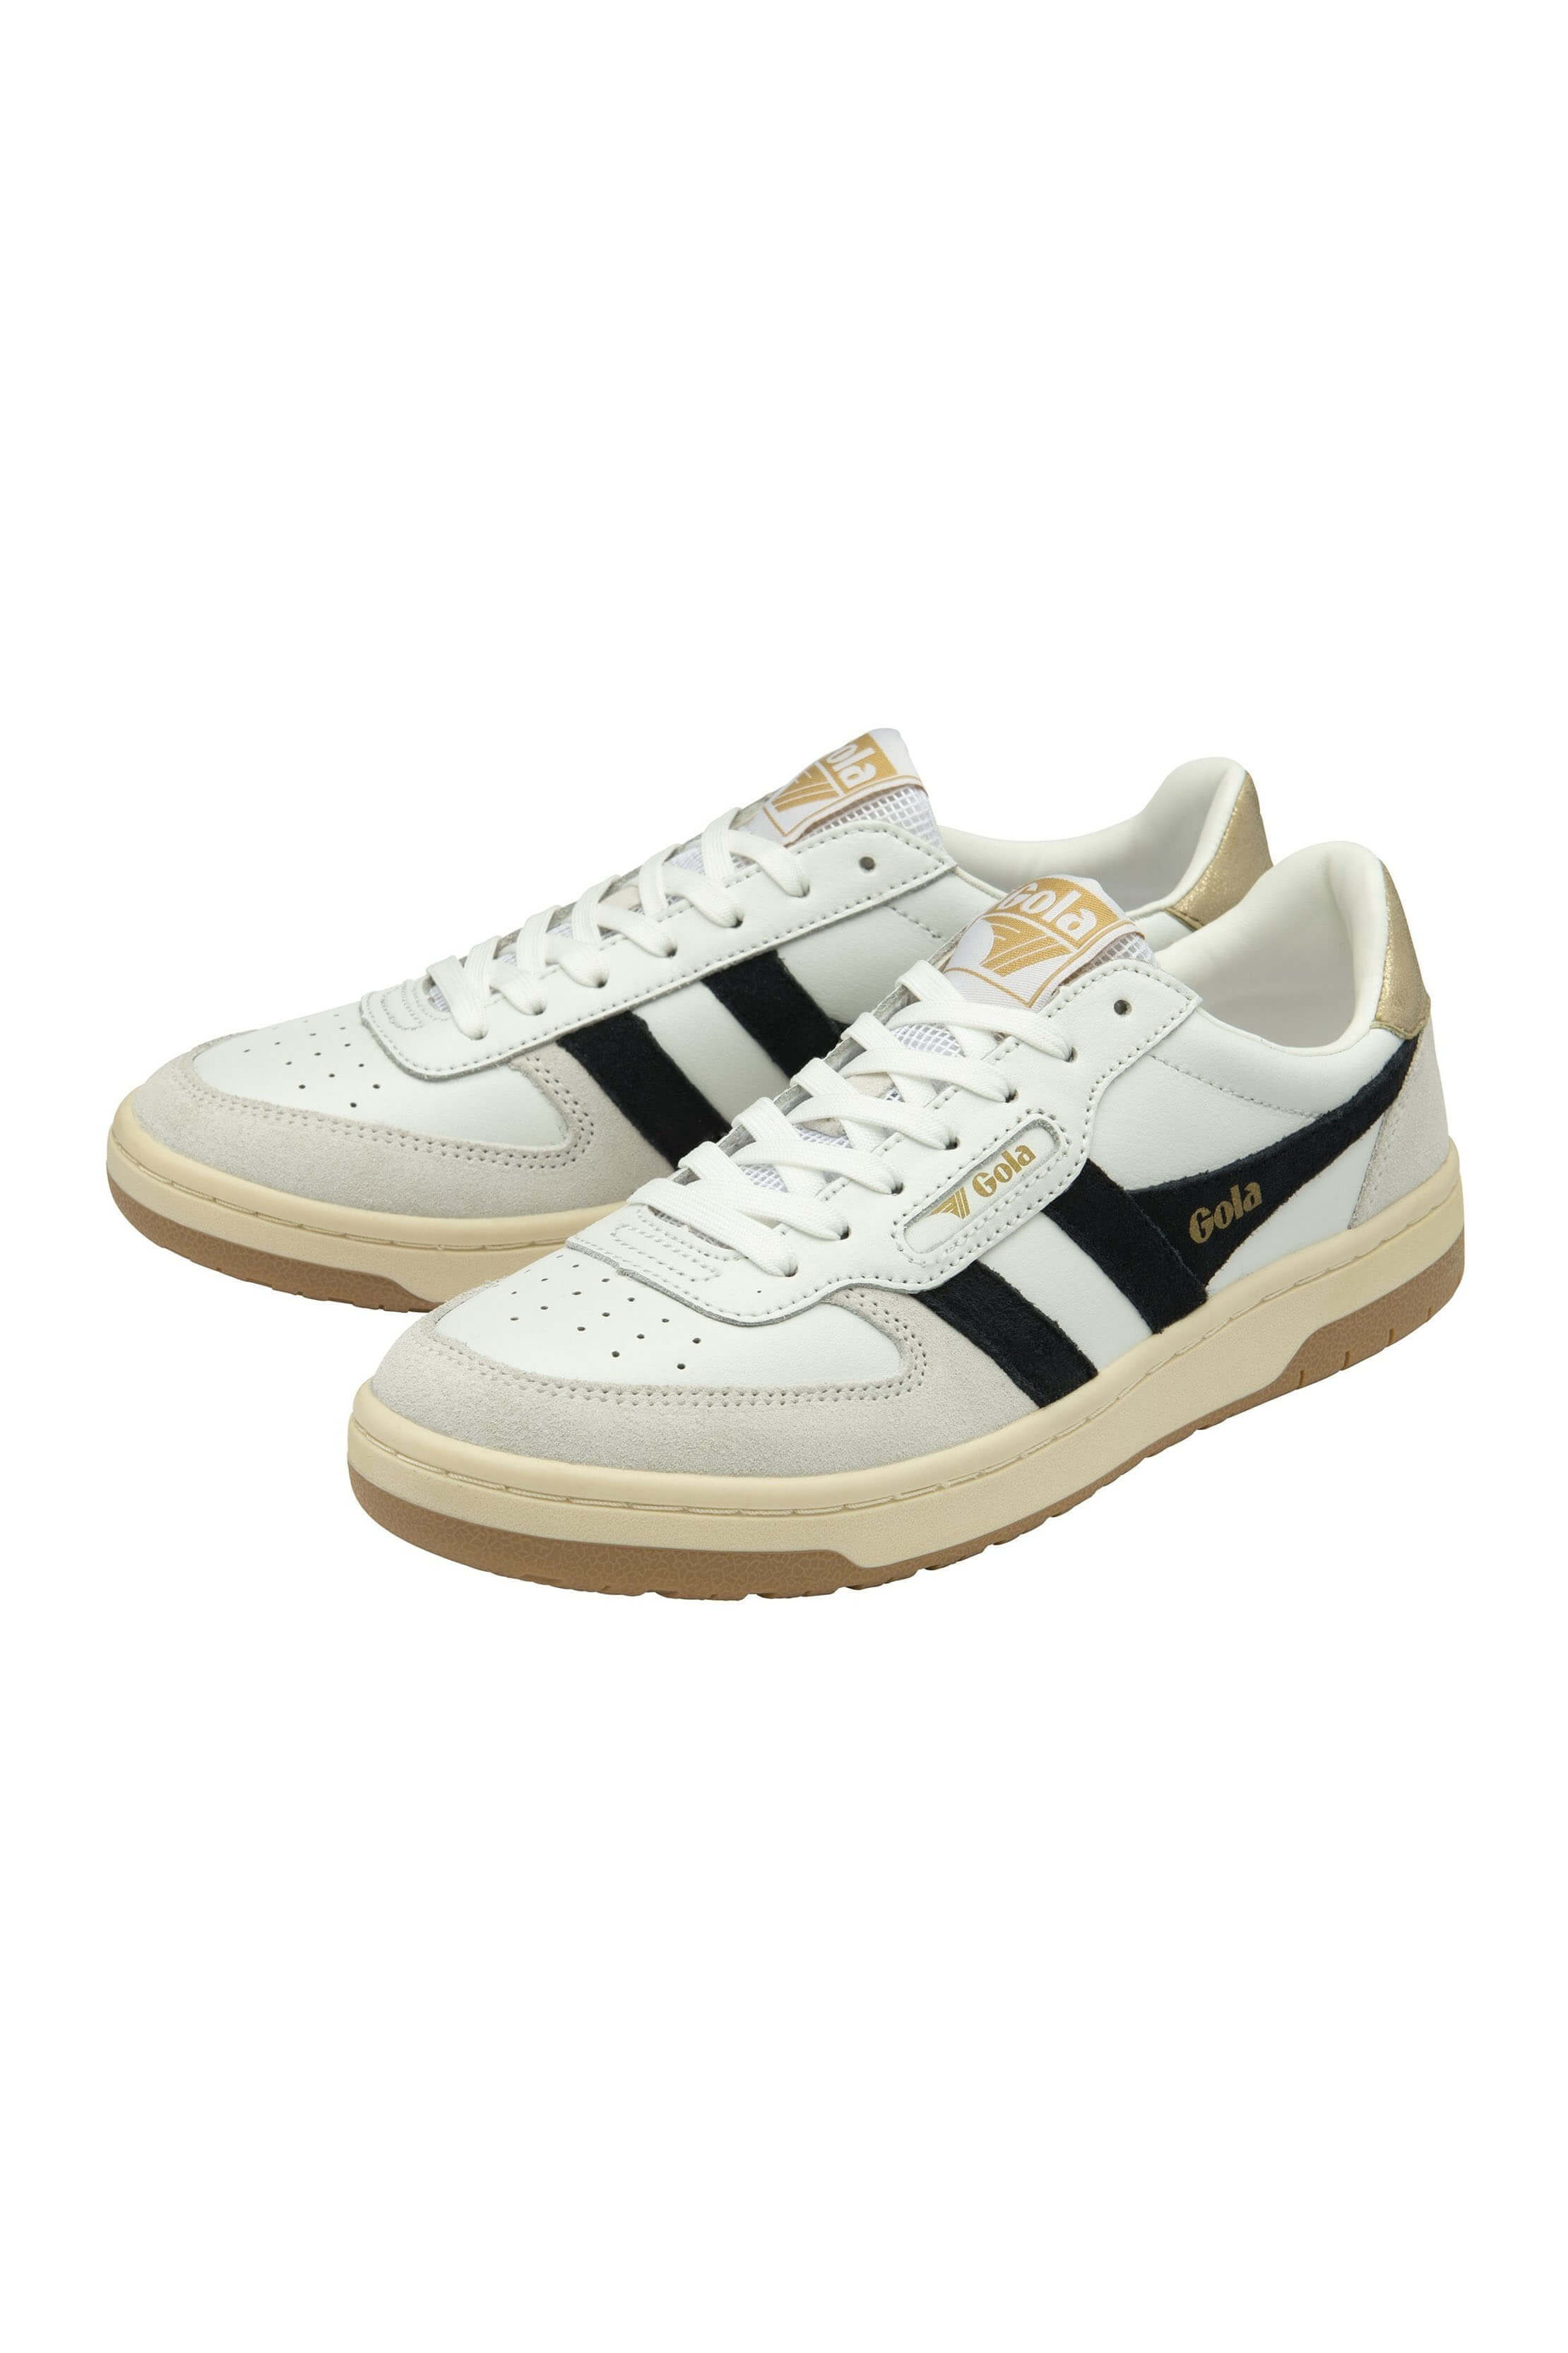 Gola hawk shoe in white black and gold